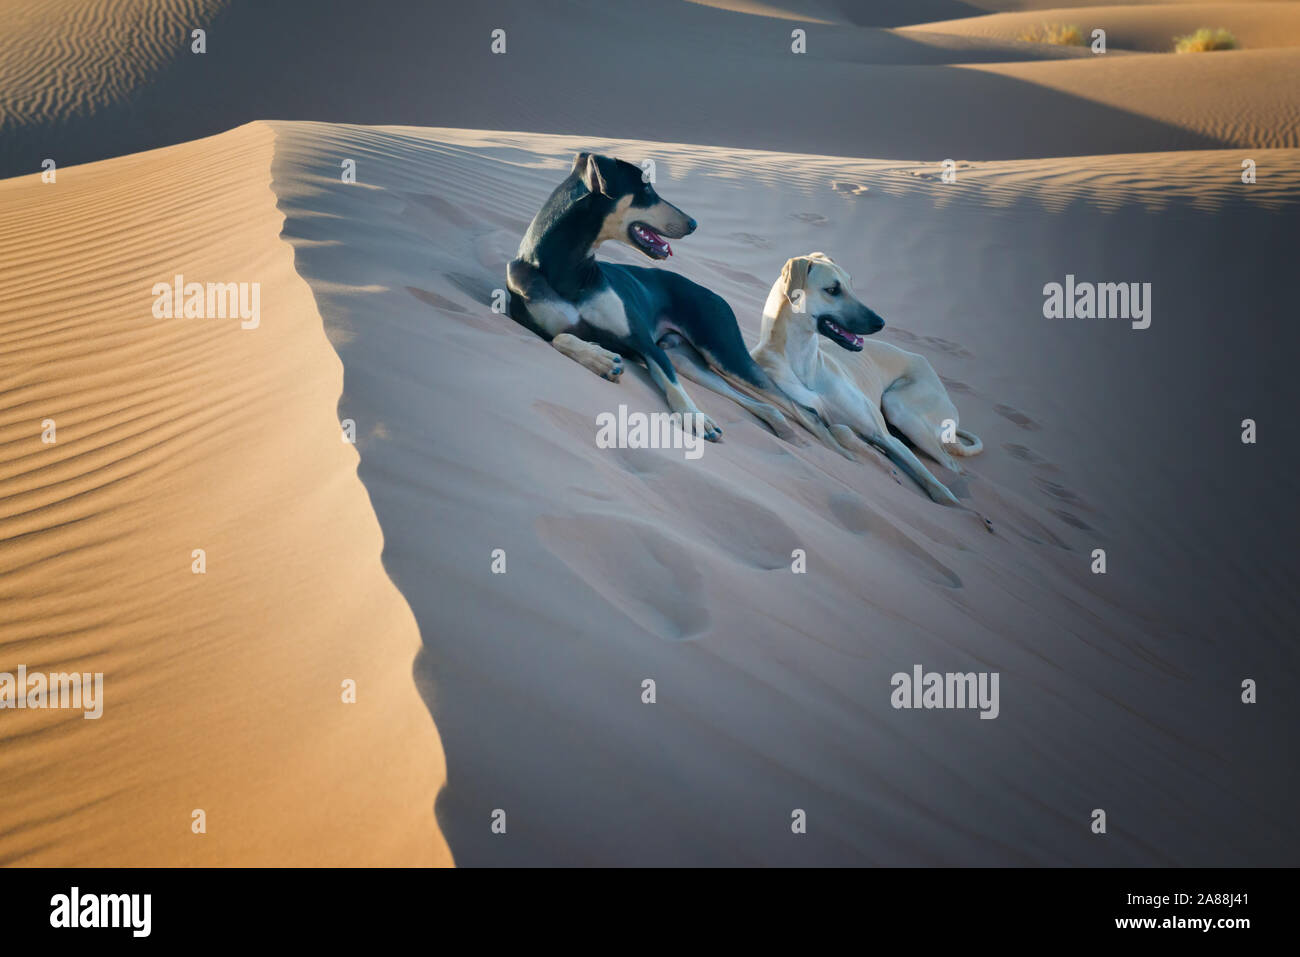 Two Sloughi dogs (Arabian greyhound) rest on top of a sand dune in the Sahara desert of Morocco. Stock Photo